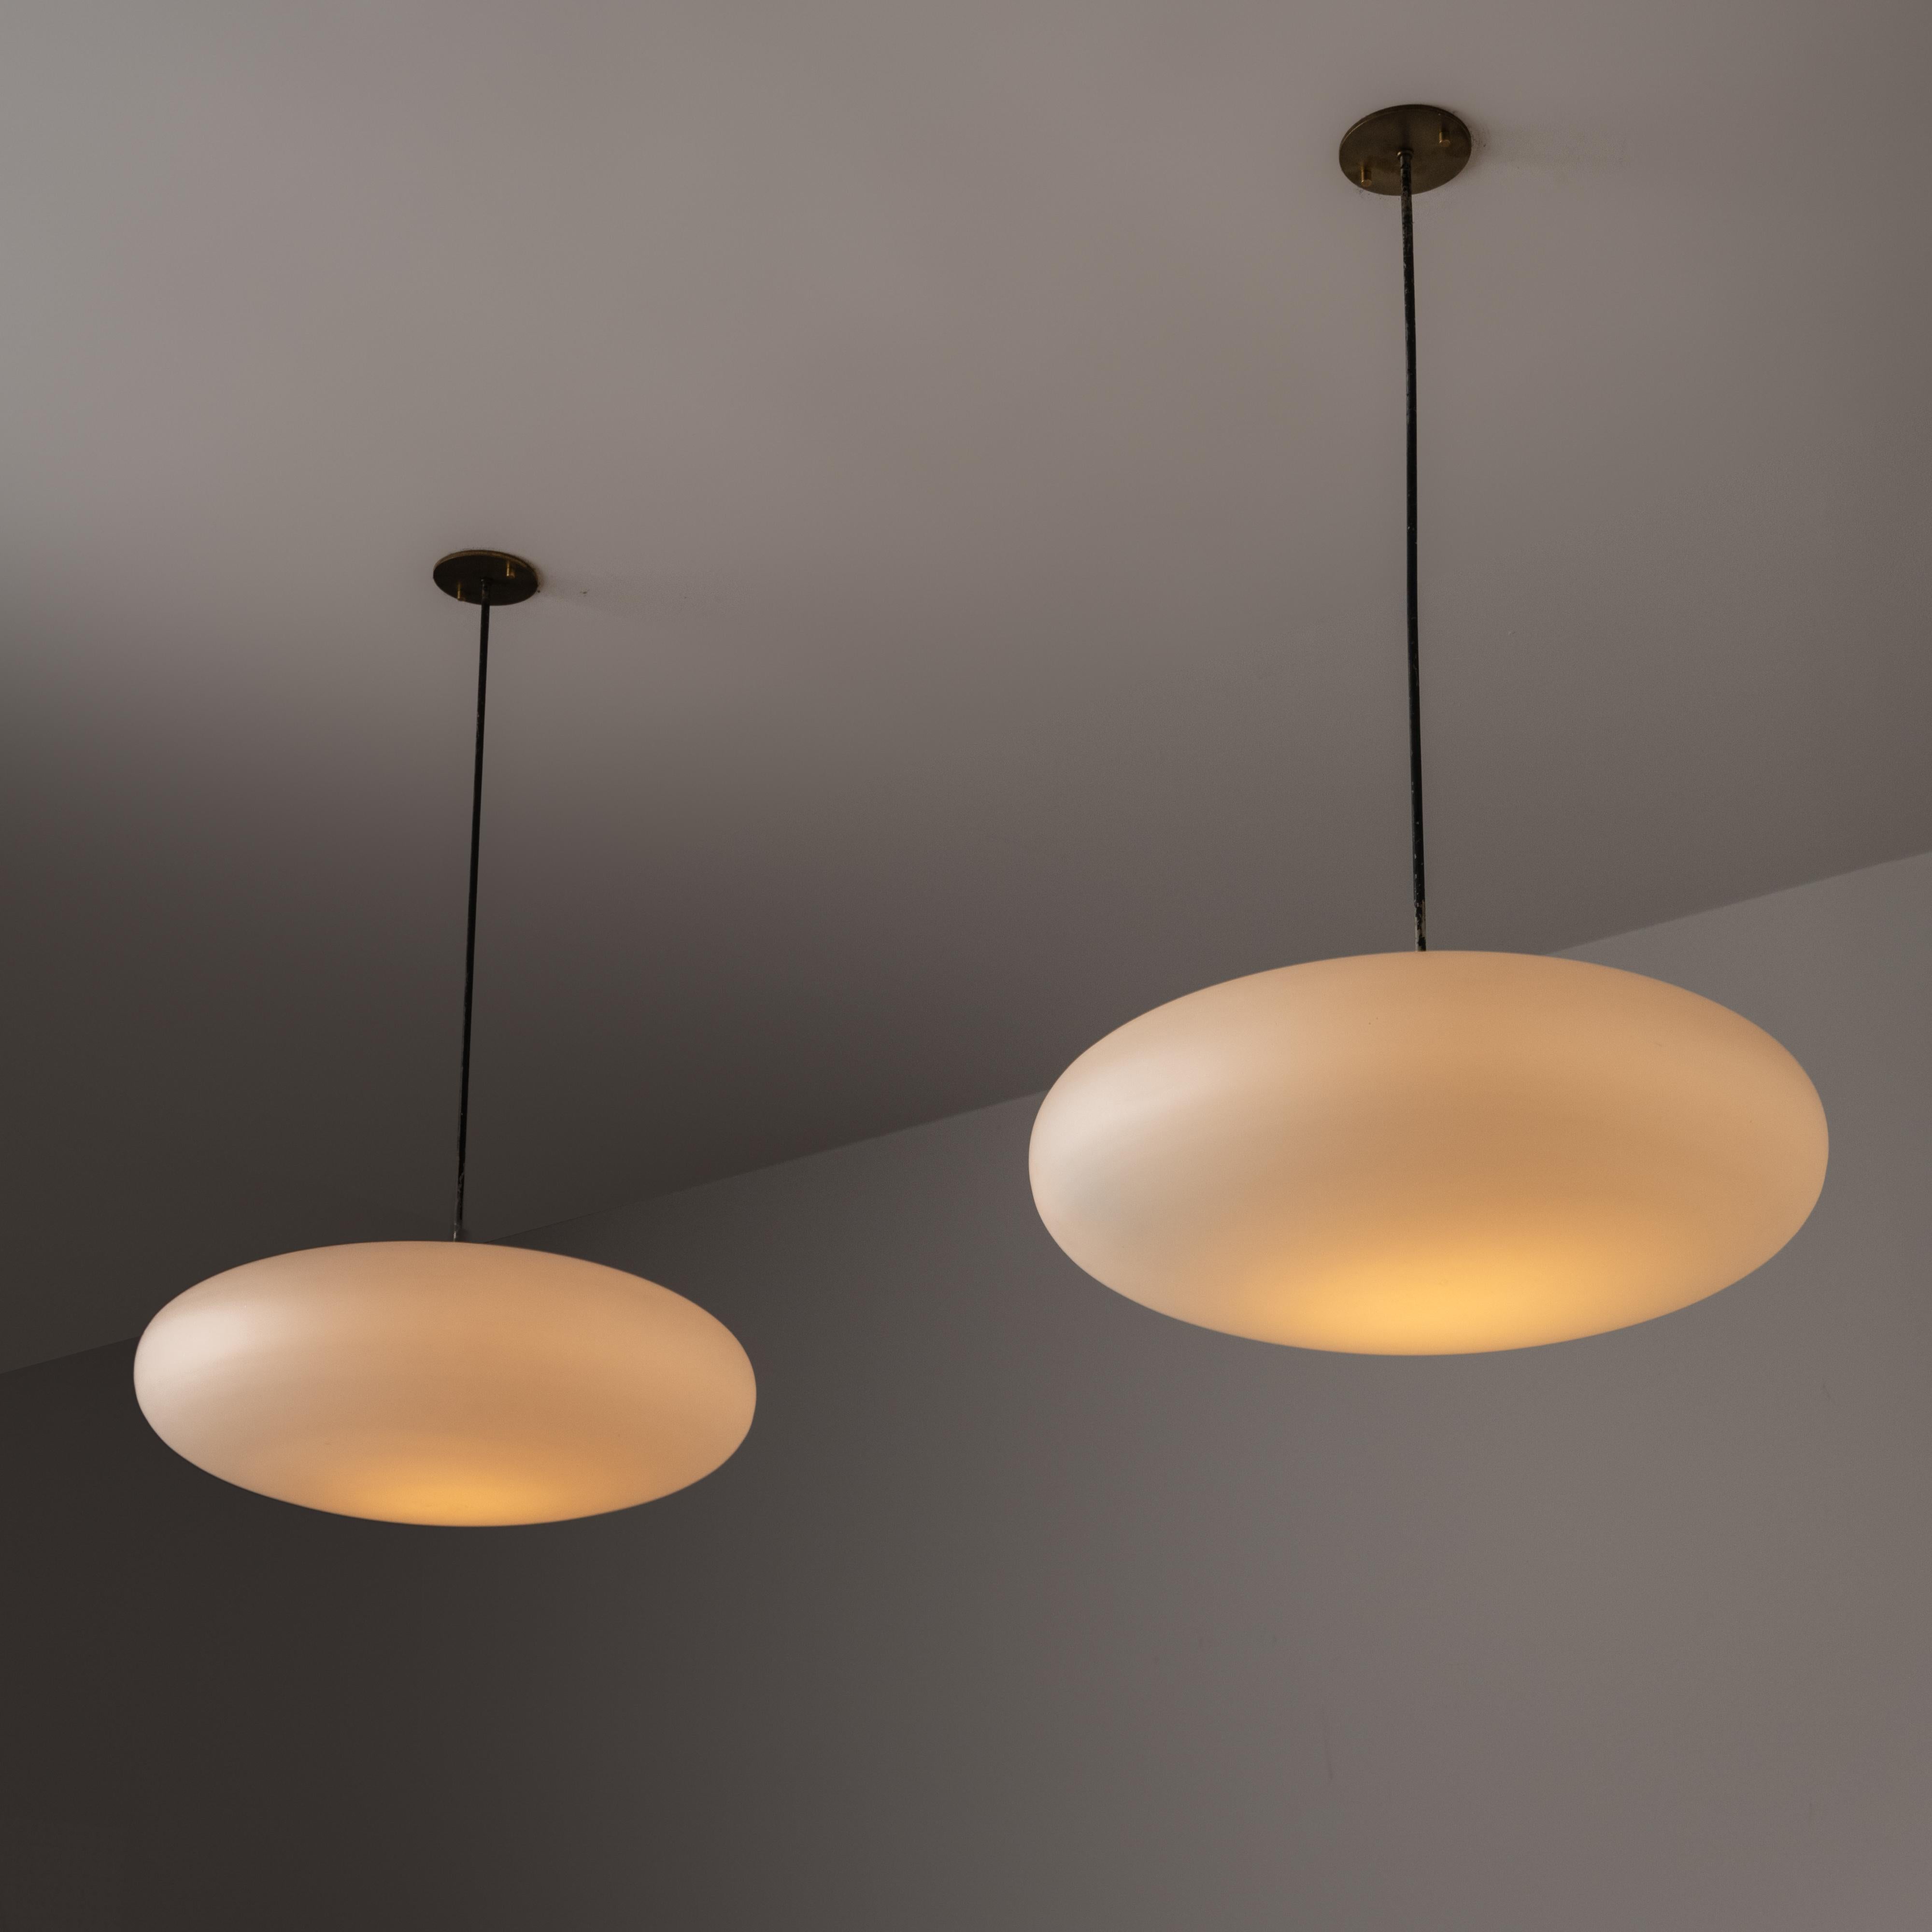 Ceiling Light by Stilnovo. Designed and manufacturered in Italy, circa the 1960s. Simplistic orb pendant with an enameled steel stem suspension. Very subtle and striking illumination from the saucer shaped glass. The fixture holds a single E27